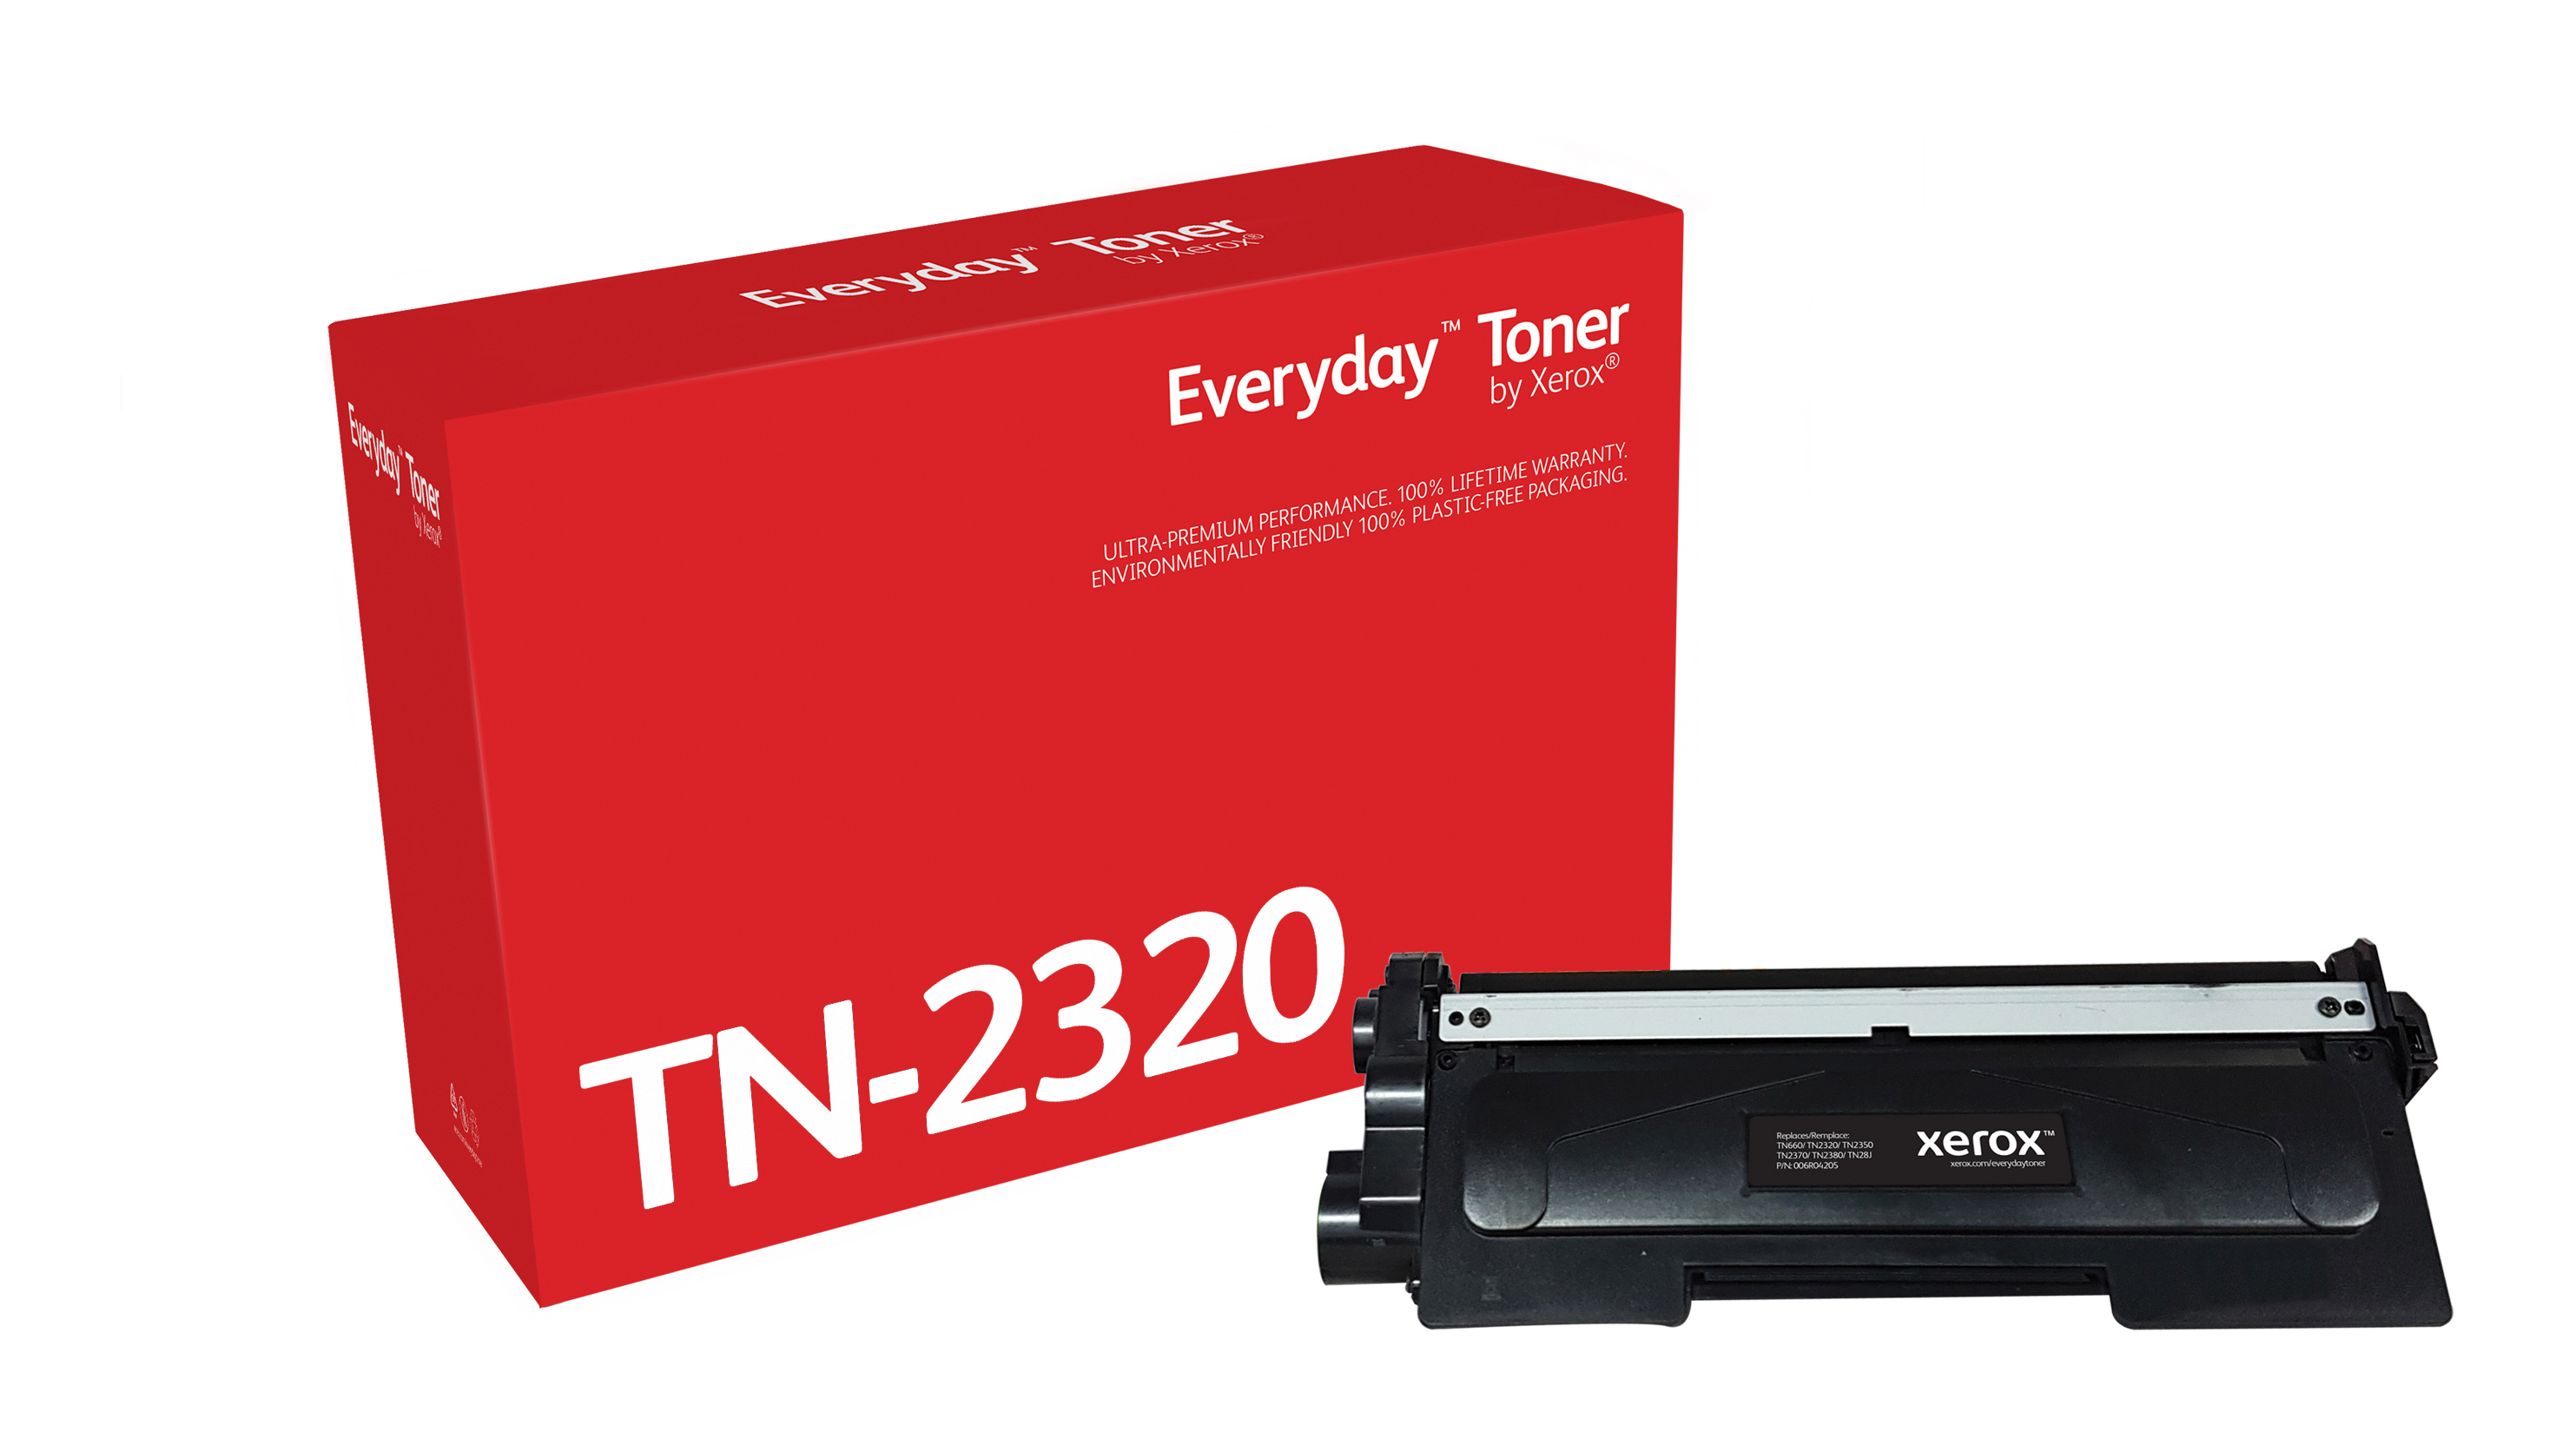 Everyday Mono Toner with TN-2320 006R04205 by